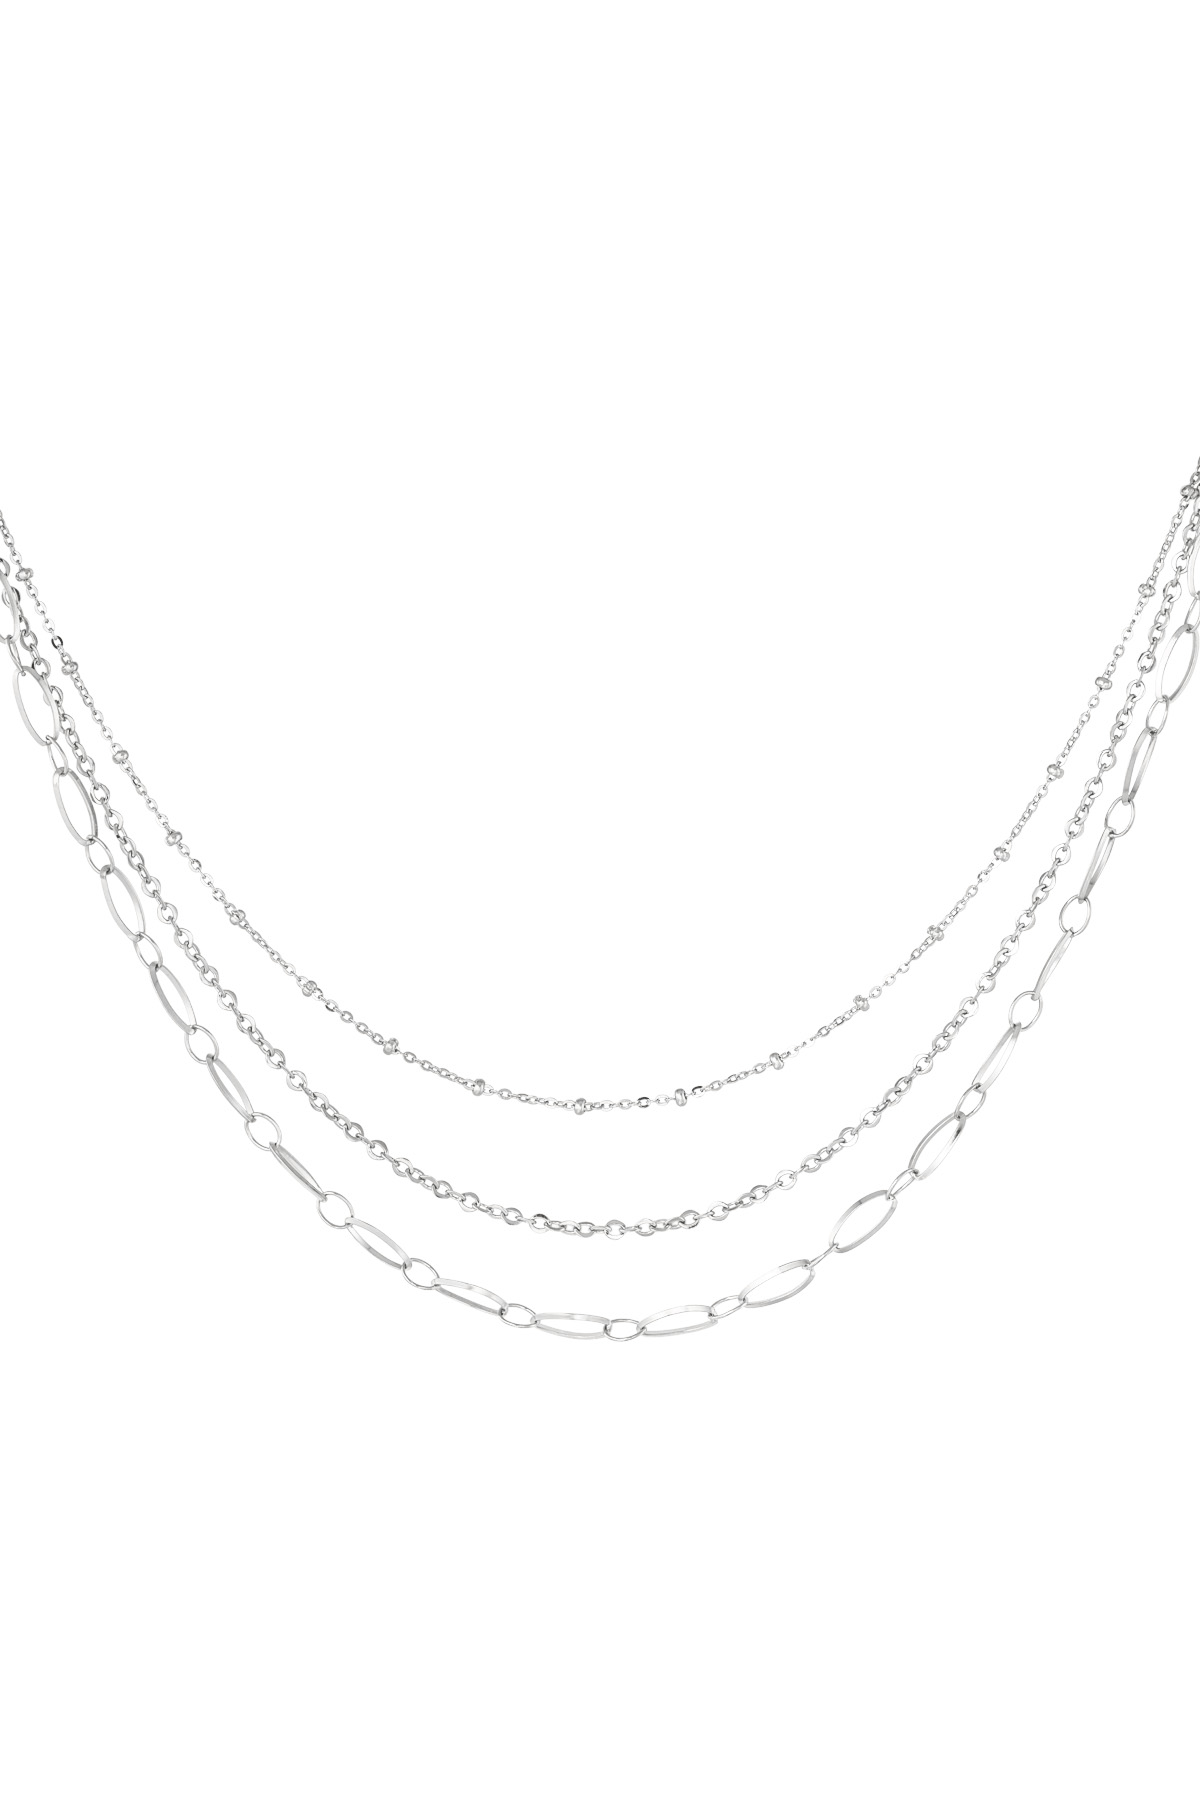 Link chain three double - silver h5 